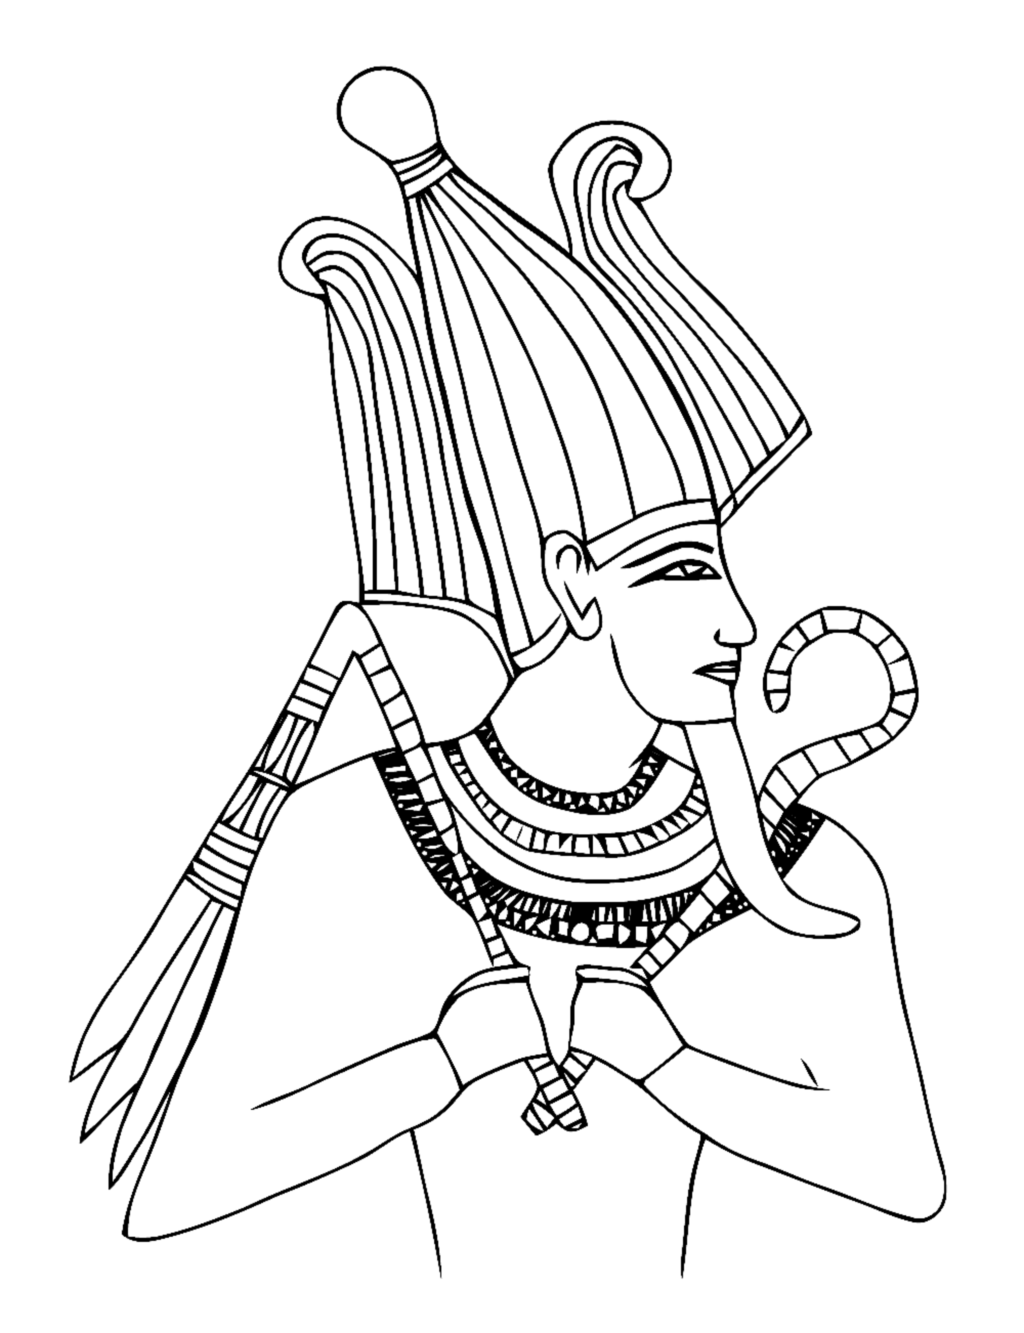 Pharaoh Egypt coloring page